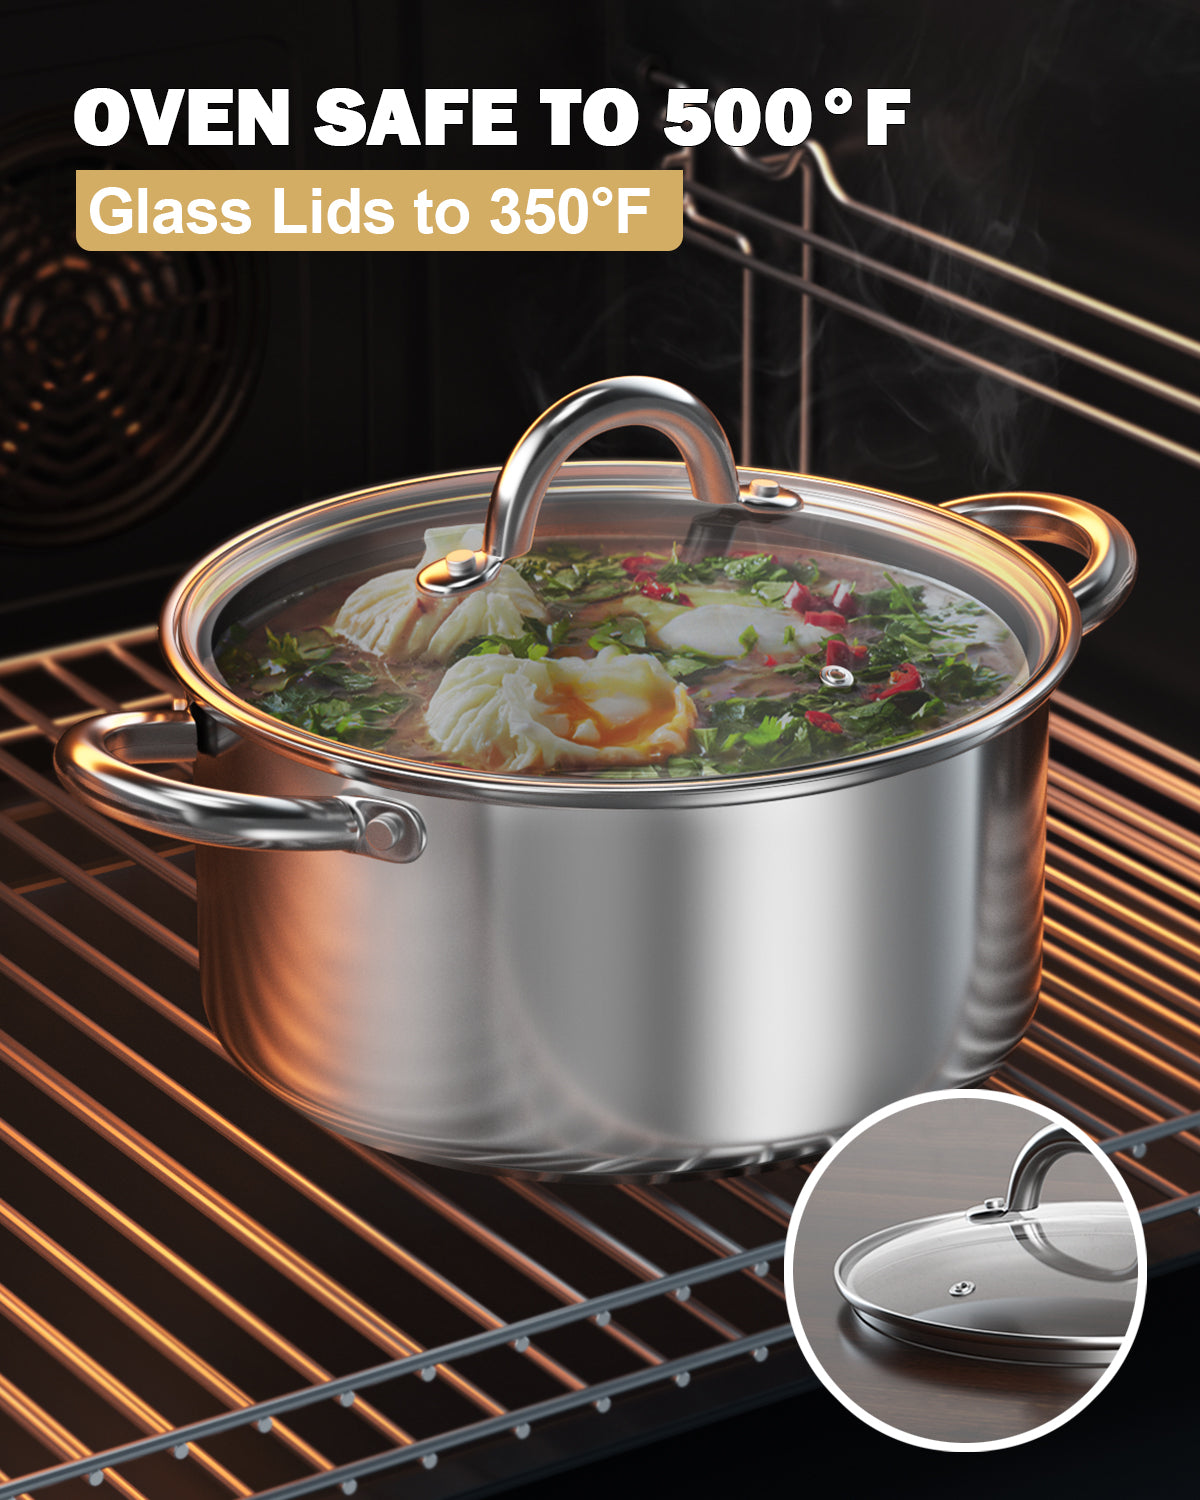 Cook N Home 16 qt. Stainless Steel Stock Pot with Glass Lid 02527 - The  Home Depot